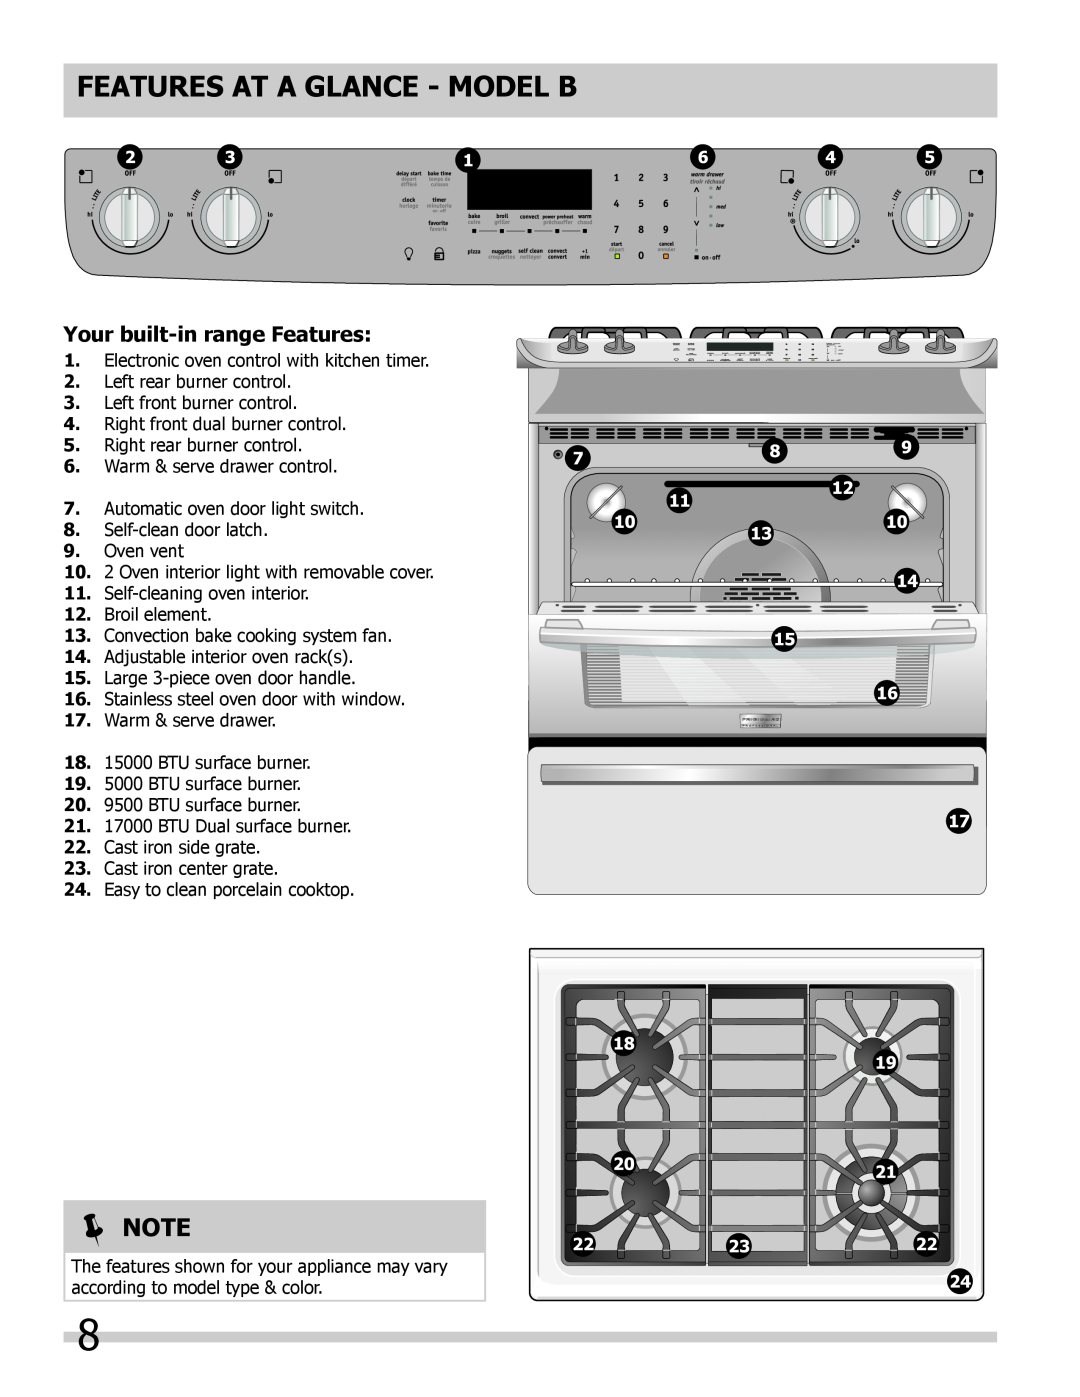 Frigidaire 318205854 manual FEATURES AT A GLANCE - mODEL B, Note, Your built-in range Features 